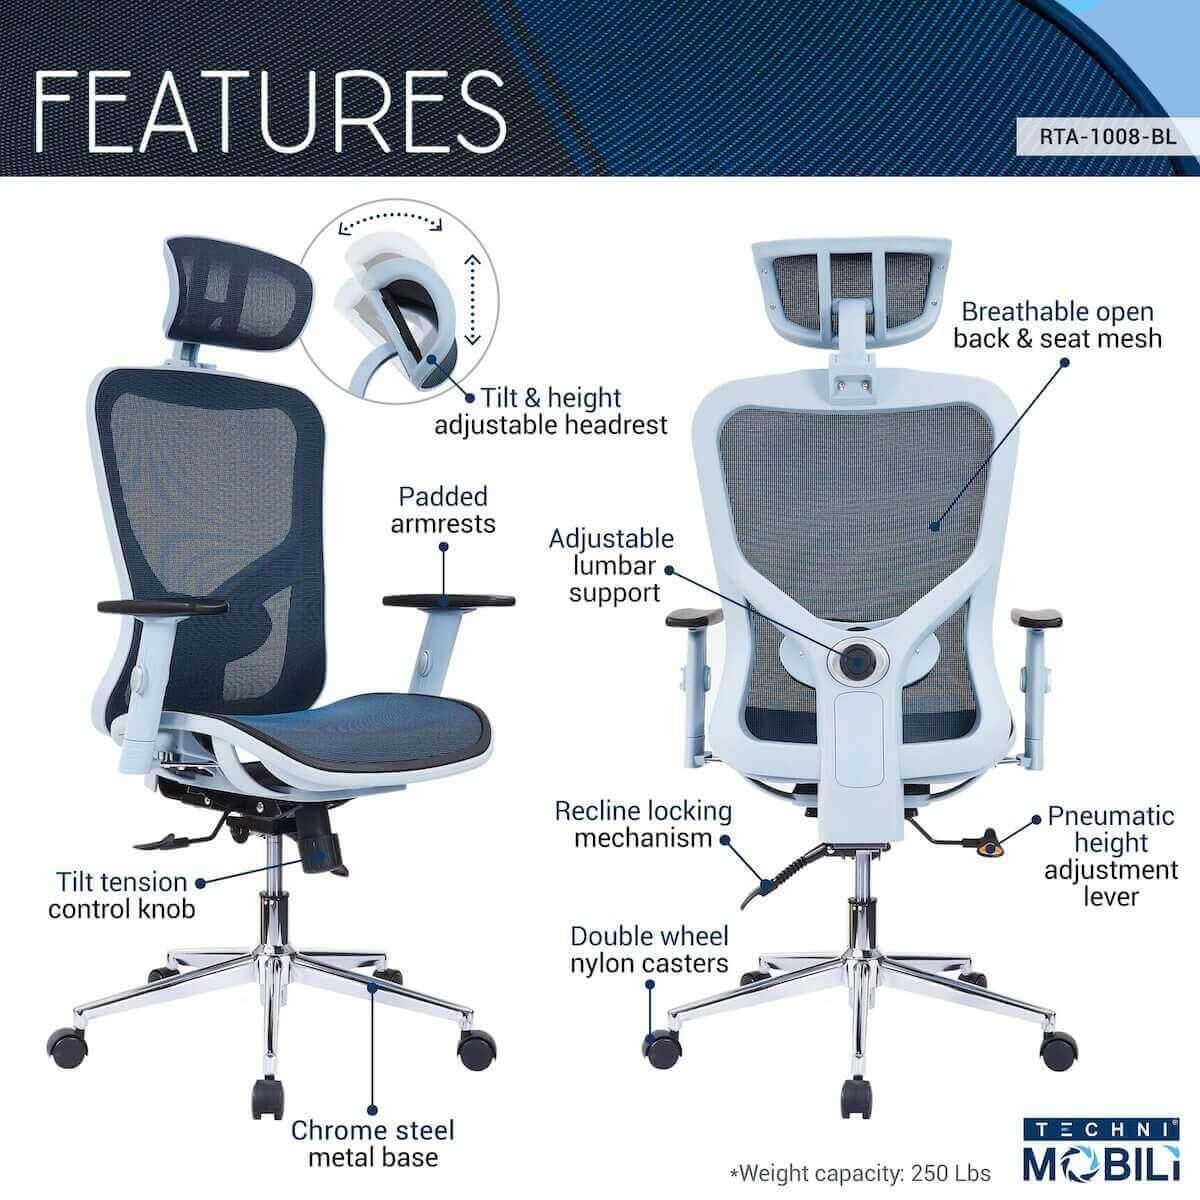 Techni Mobili Blue High Back Executive Mesh Office Chair with Arms, Headrest, and Lumbar Support RTA-1008-BL Features